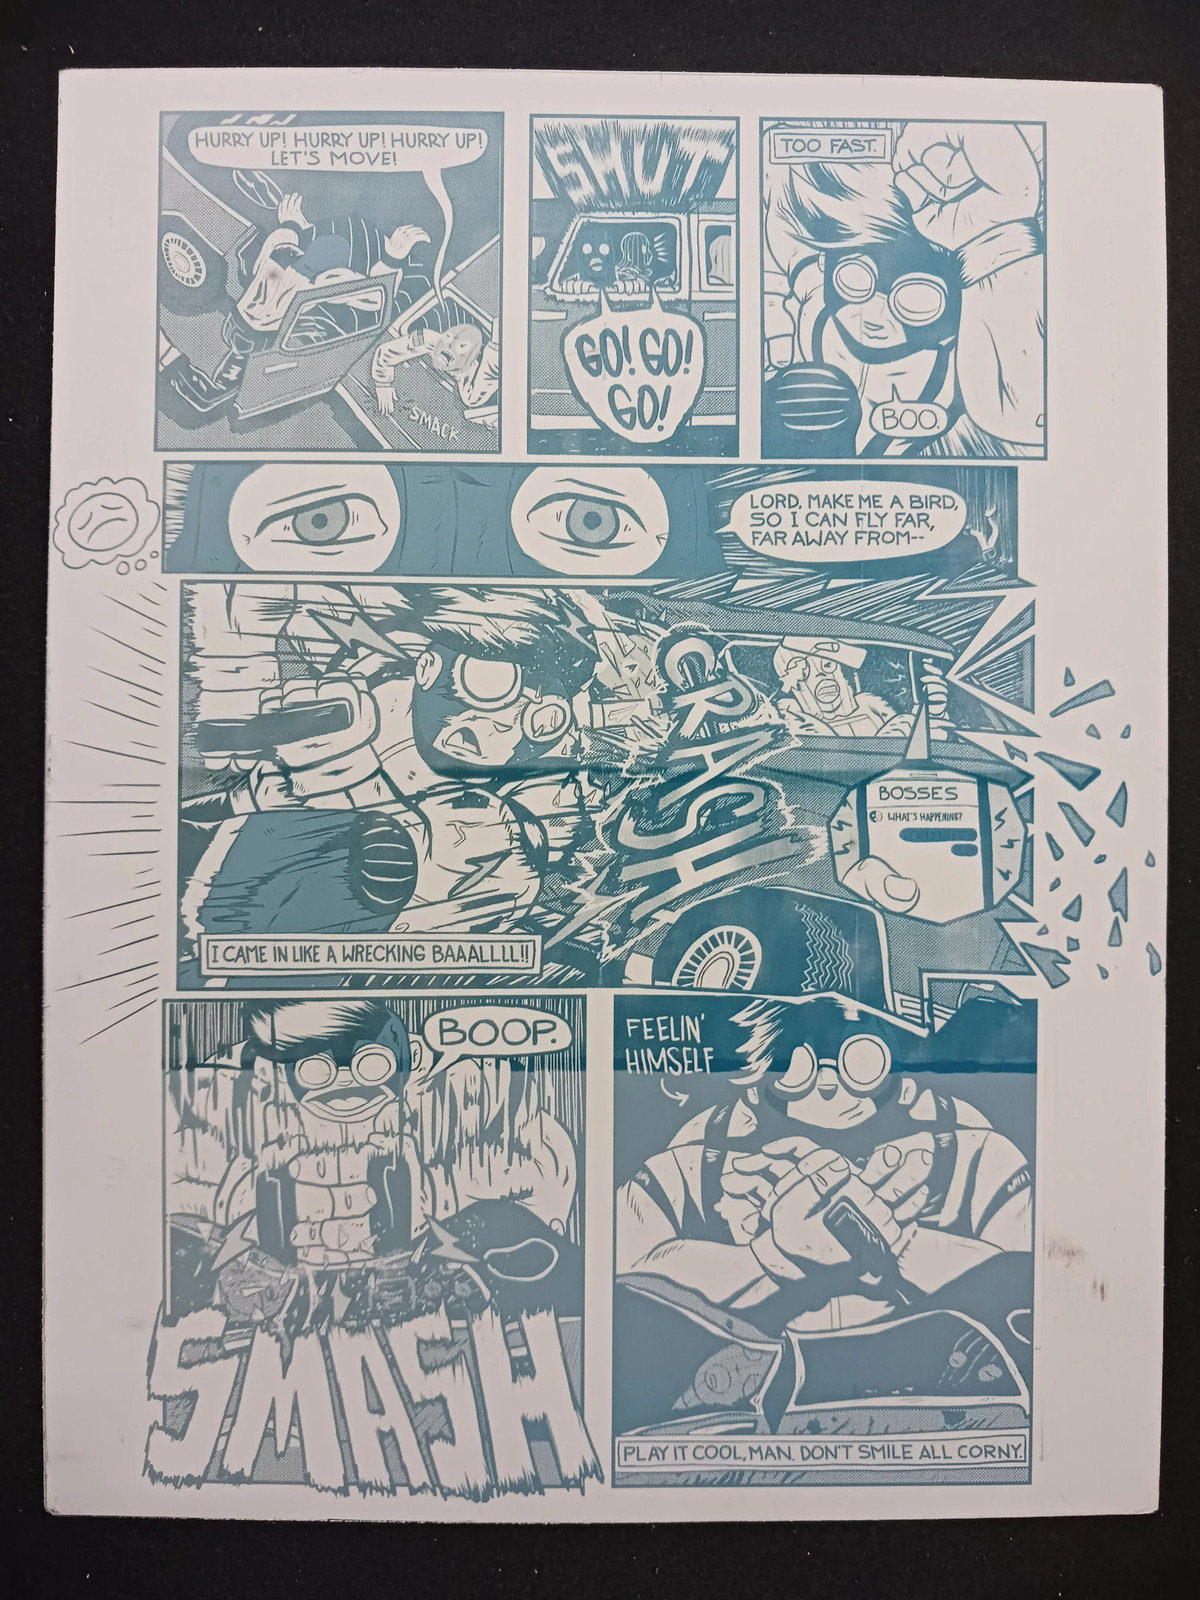 Thud Double Vision Magazine - Page 14 - PRESSWORKS - Comic Art - Printer Plate -